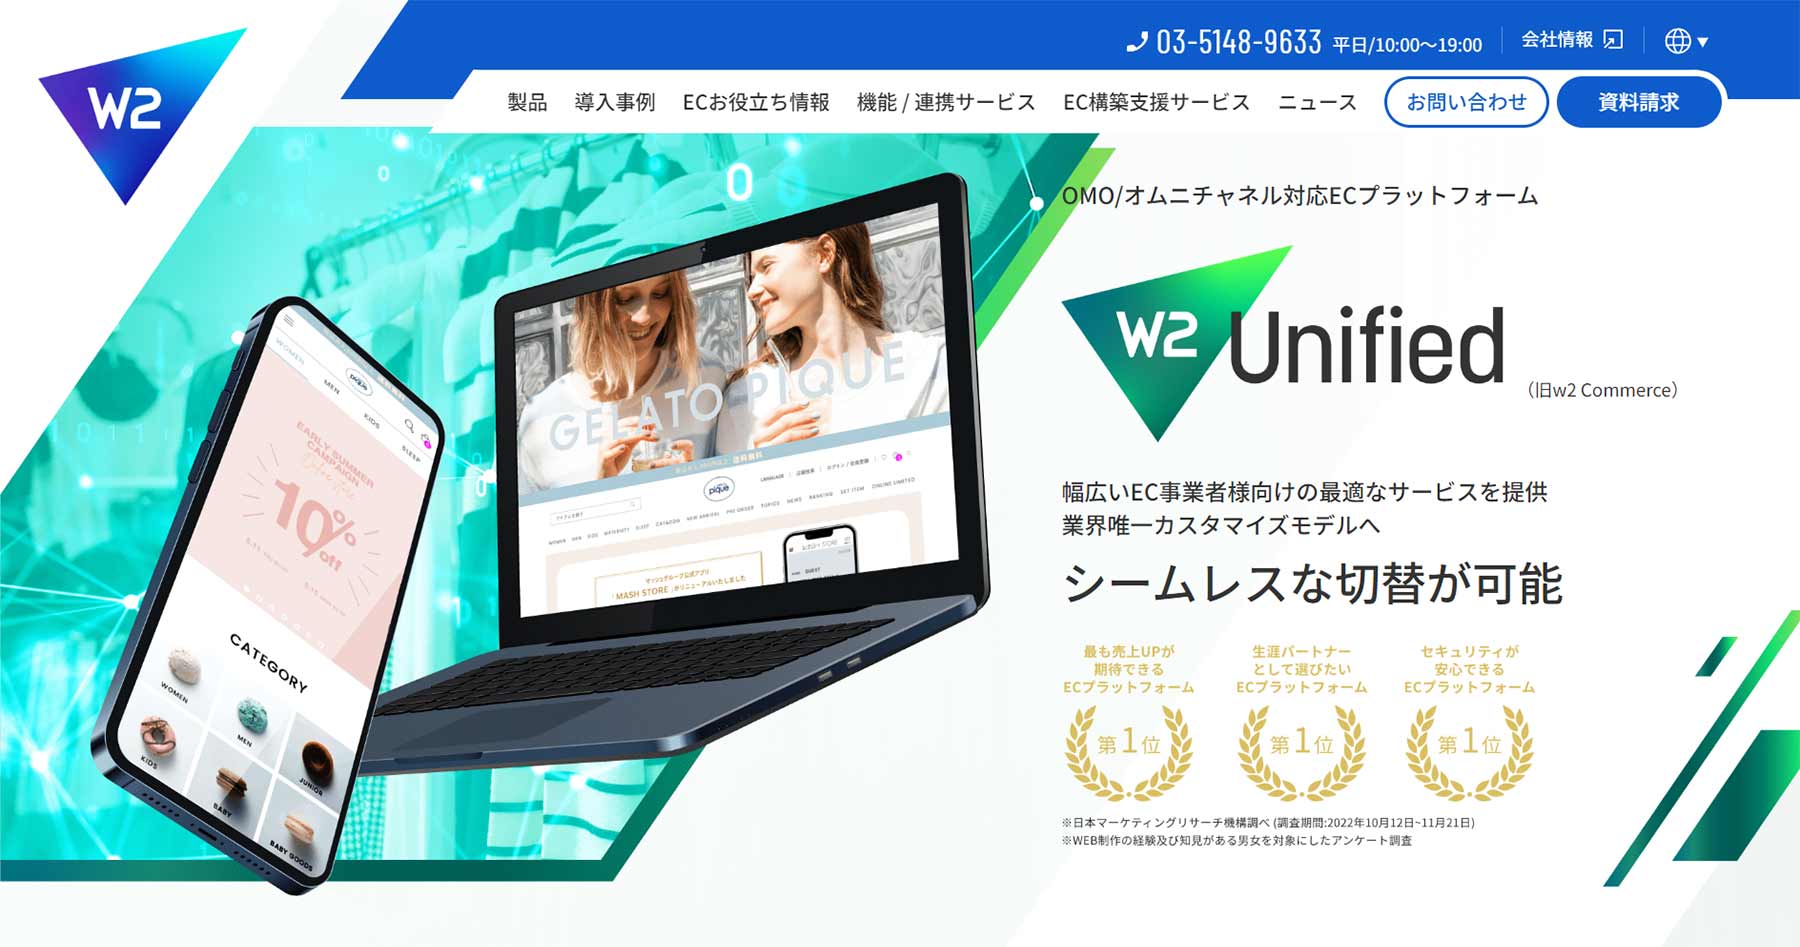 W2 Unified公式Webサイト